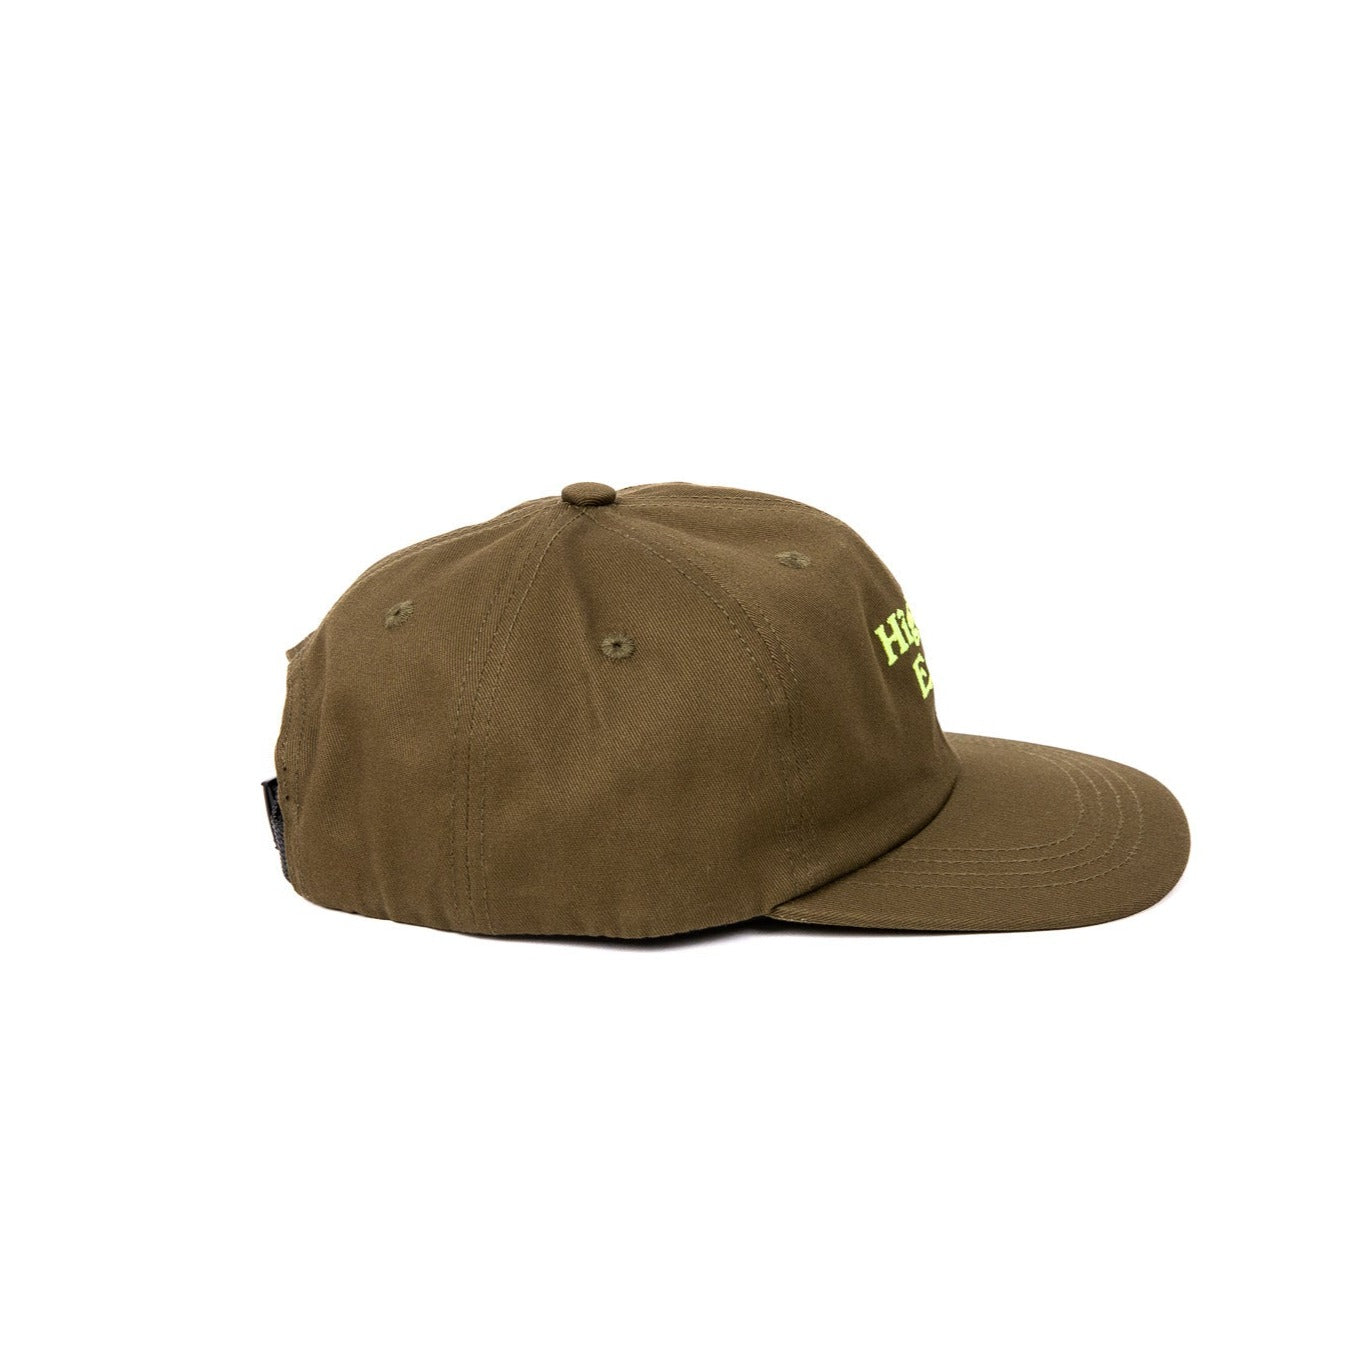 High On Earth hat - Olive